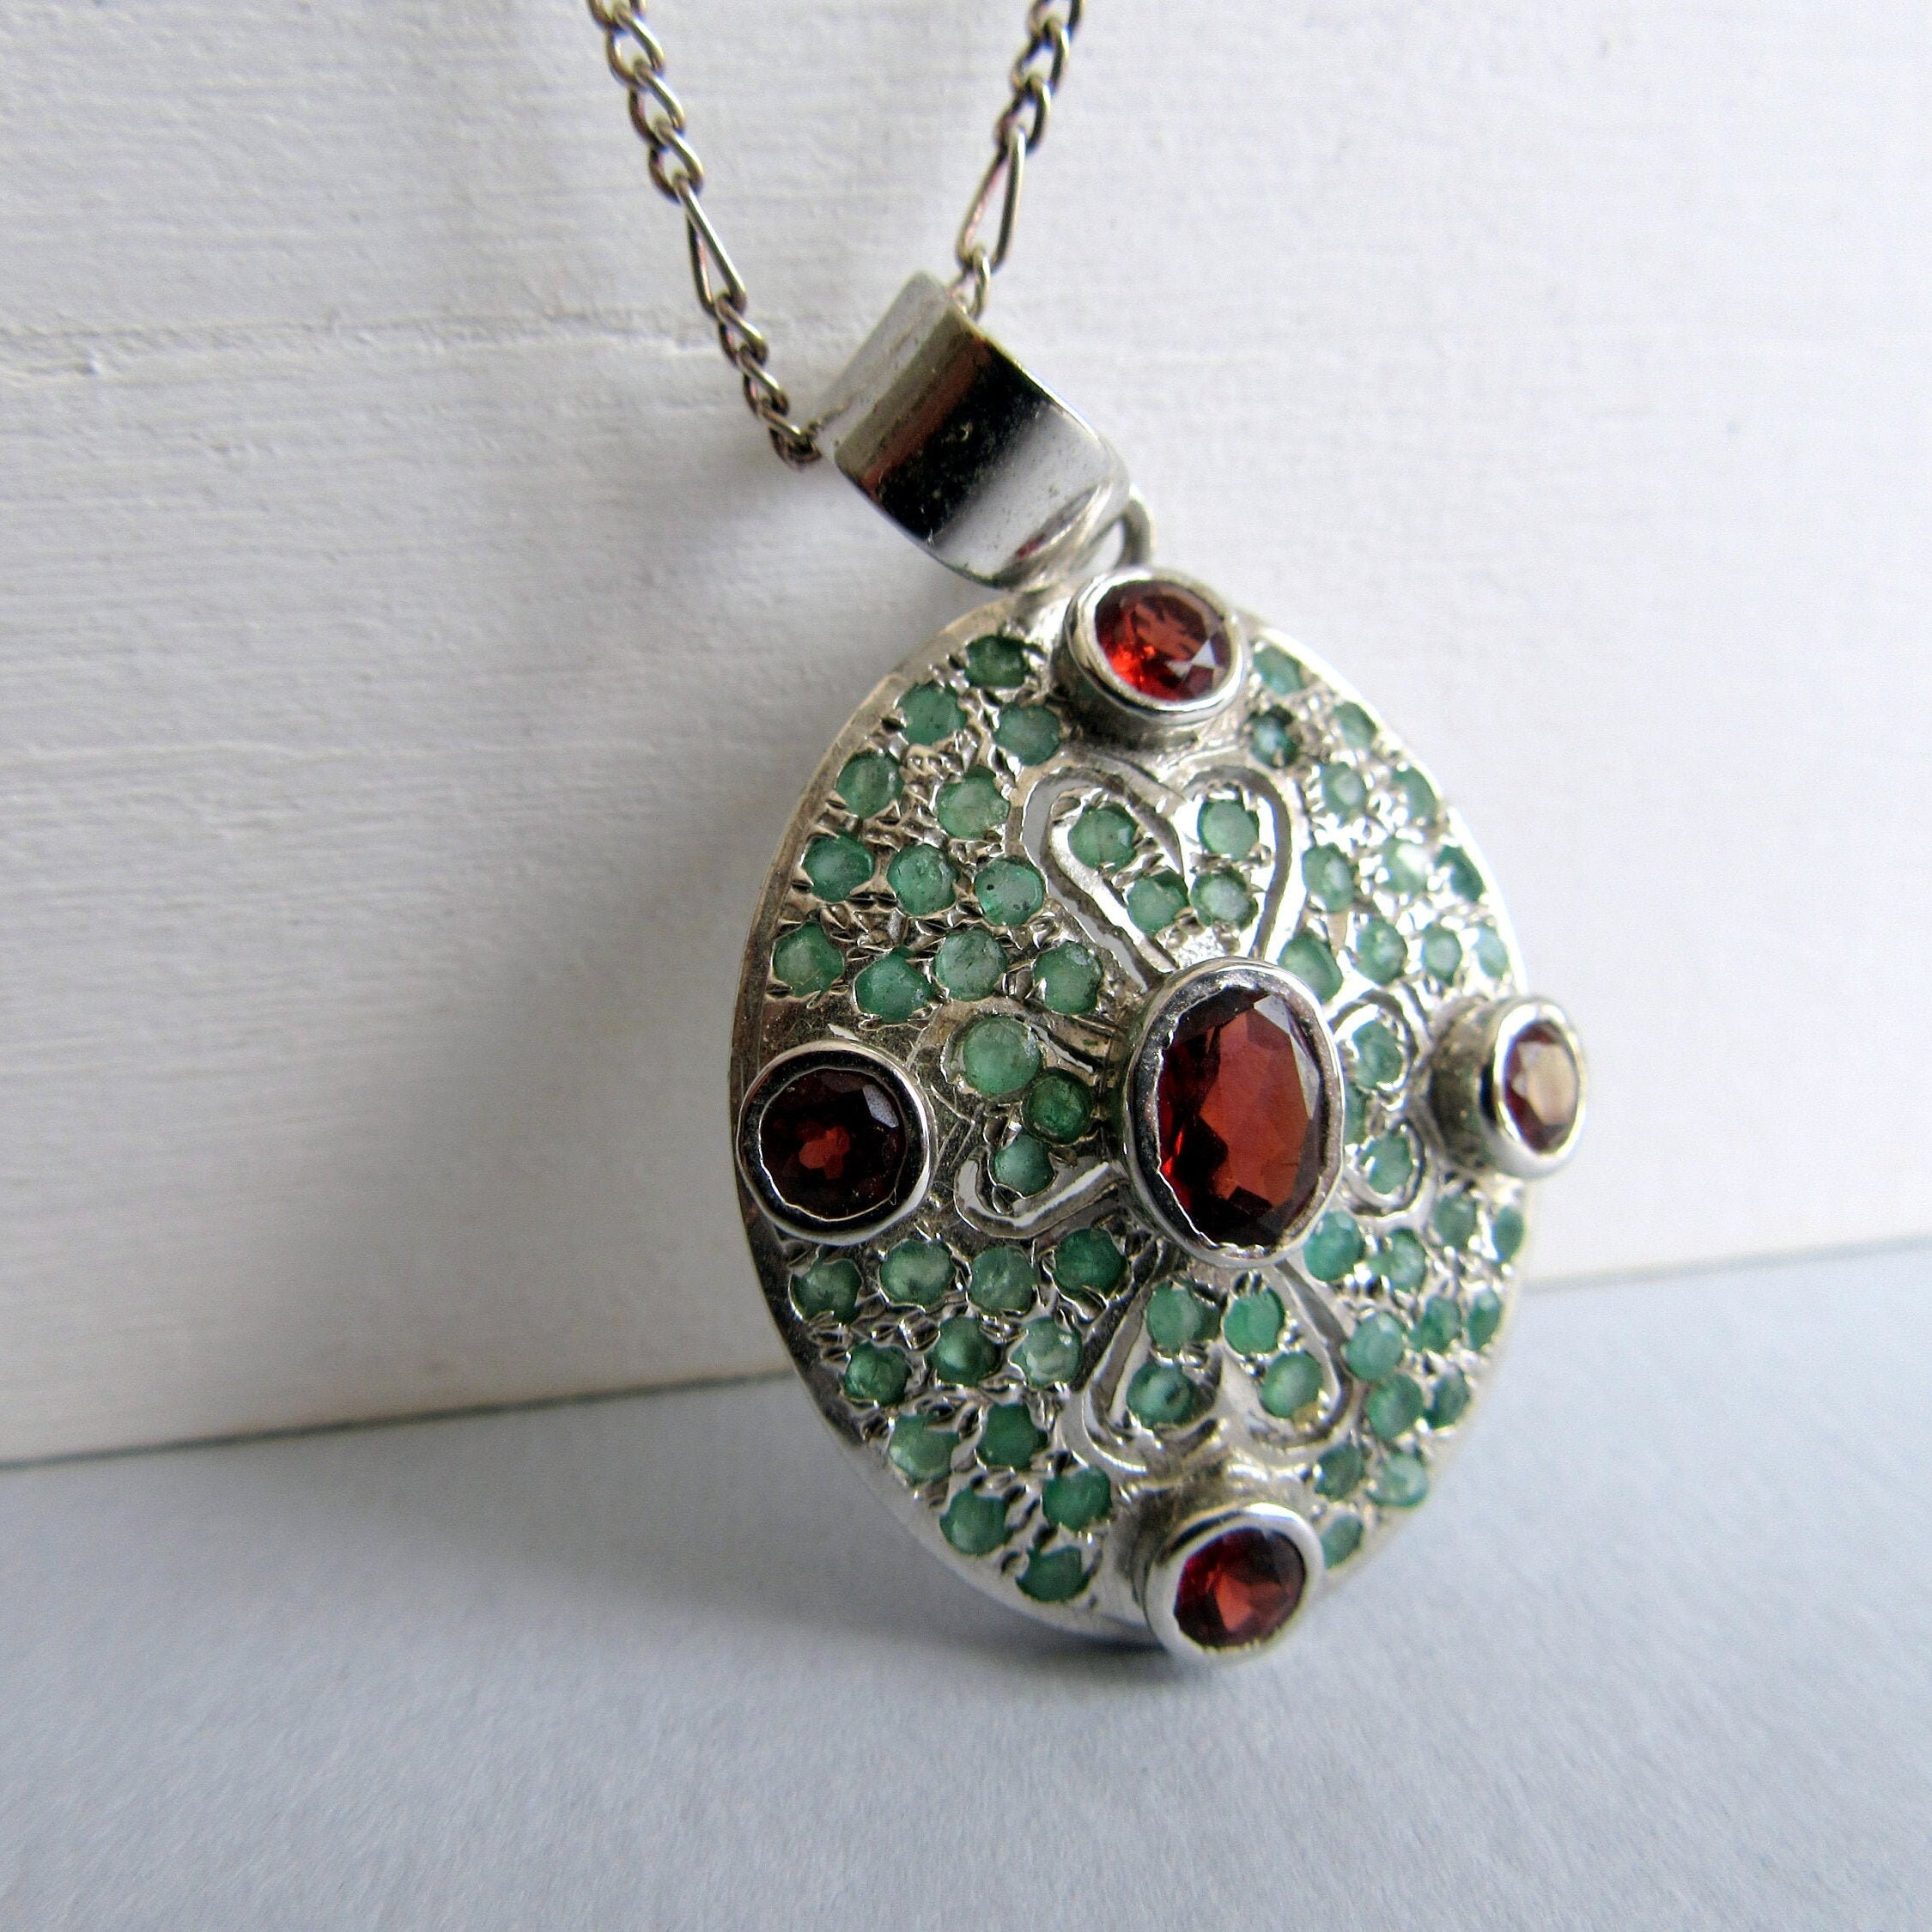 Emerald and Garnet Pendant From India - Etsy